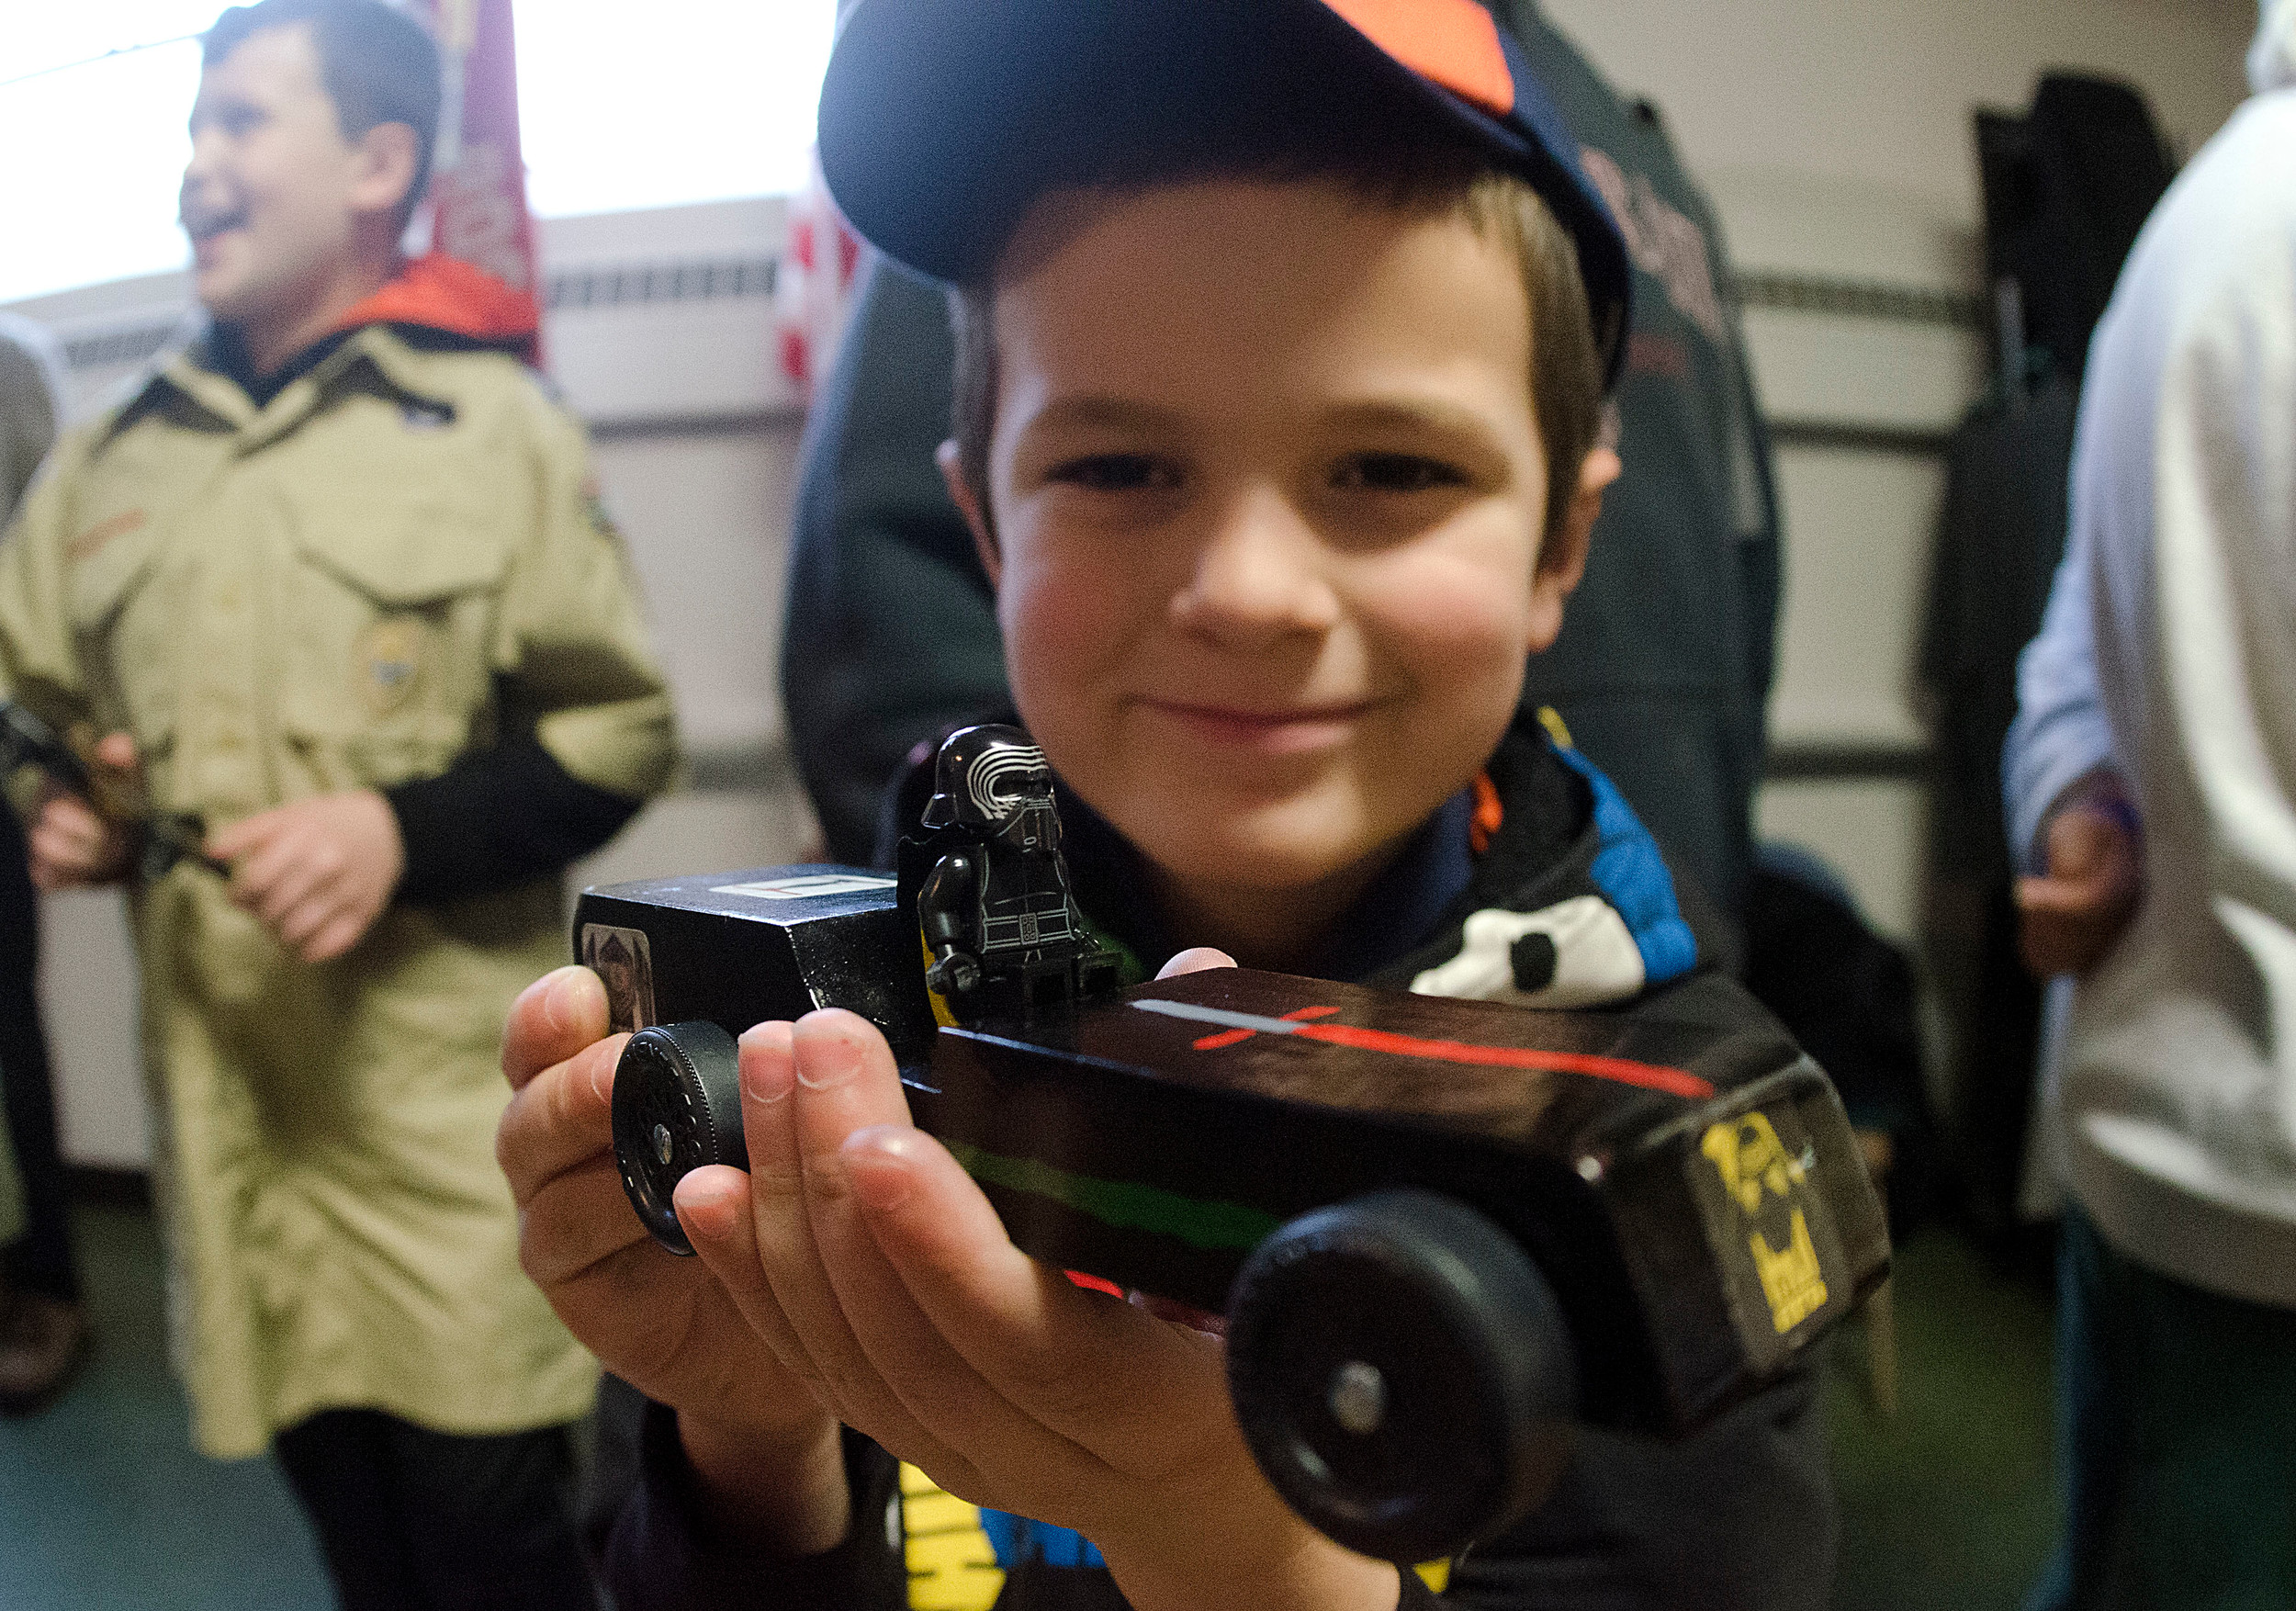 Gavin Courville of Pack 82 Portsmouth displays his Darth Vader car.